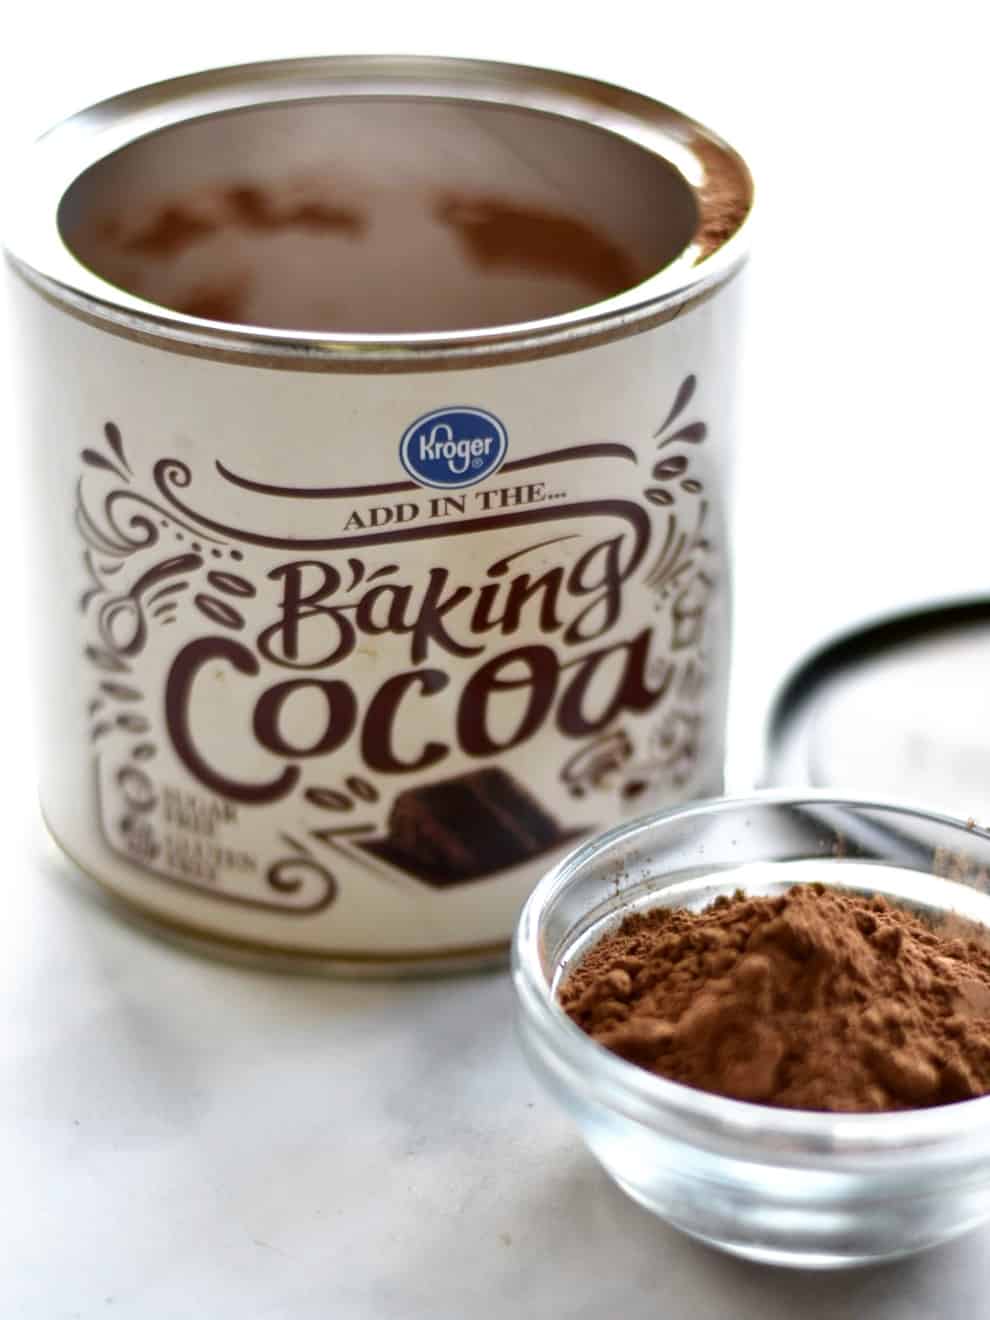 close up shot of a can of baking cocoa